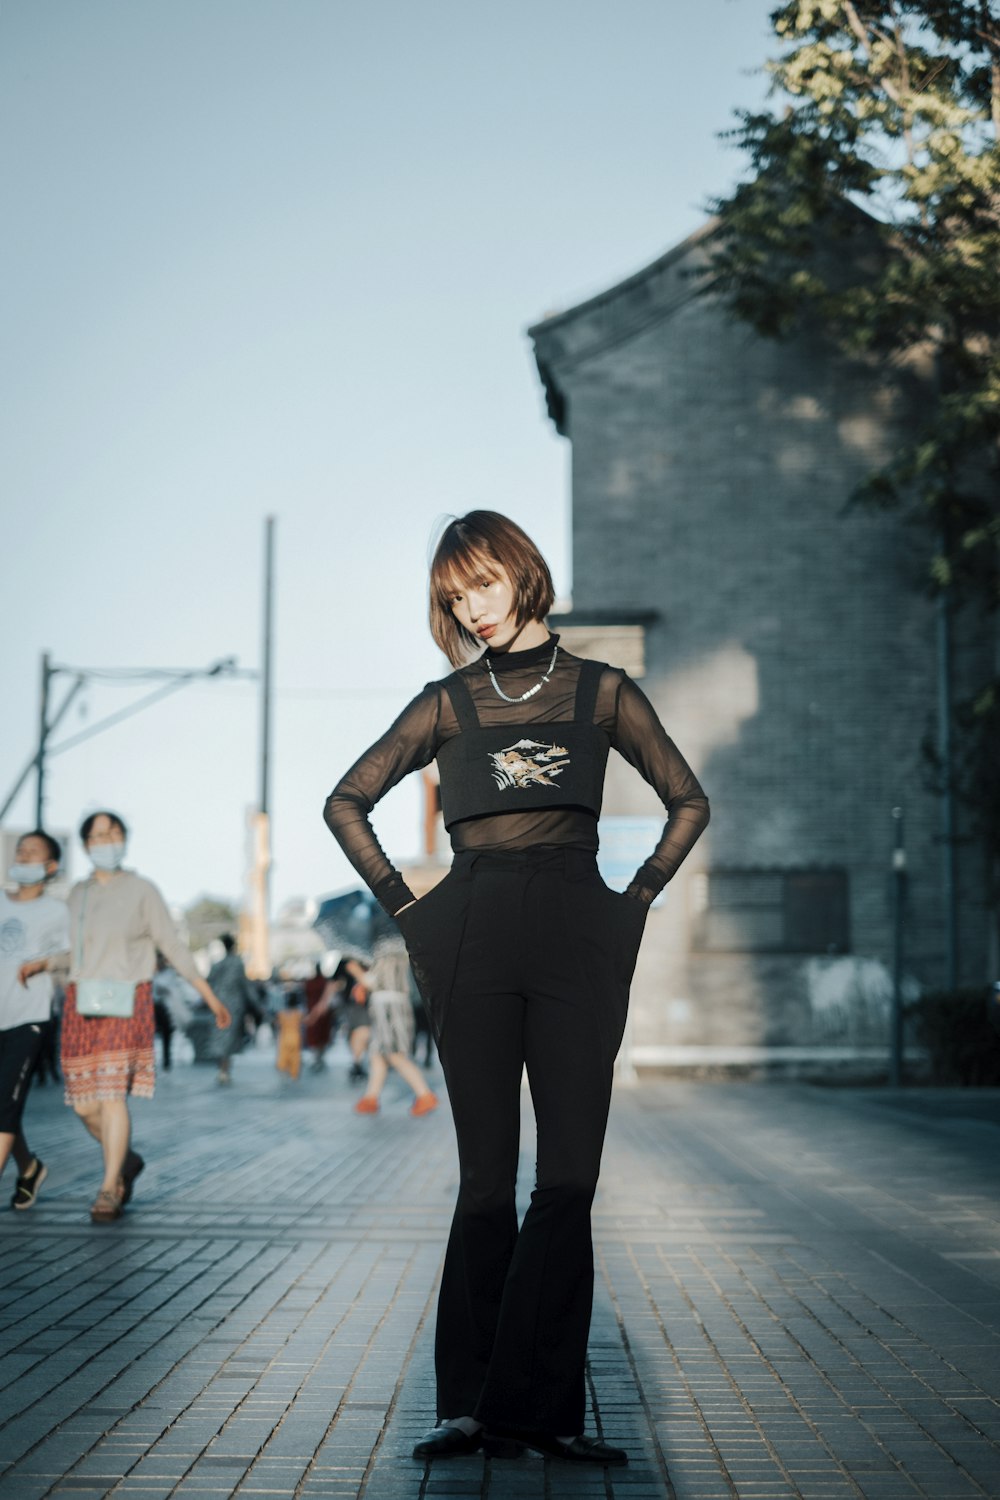 a woman in a black outfit standing on a sidewalk